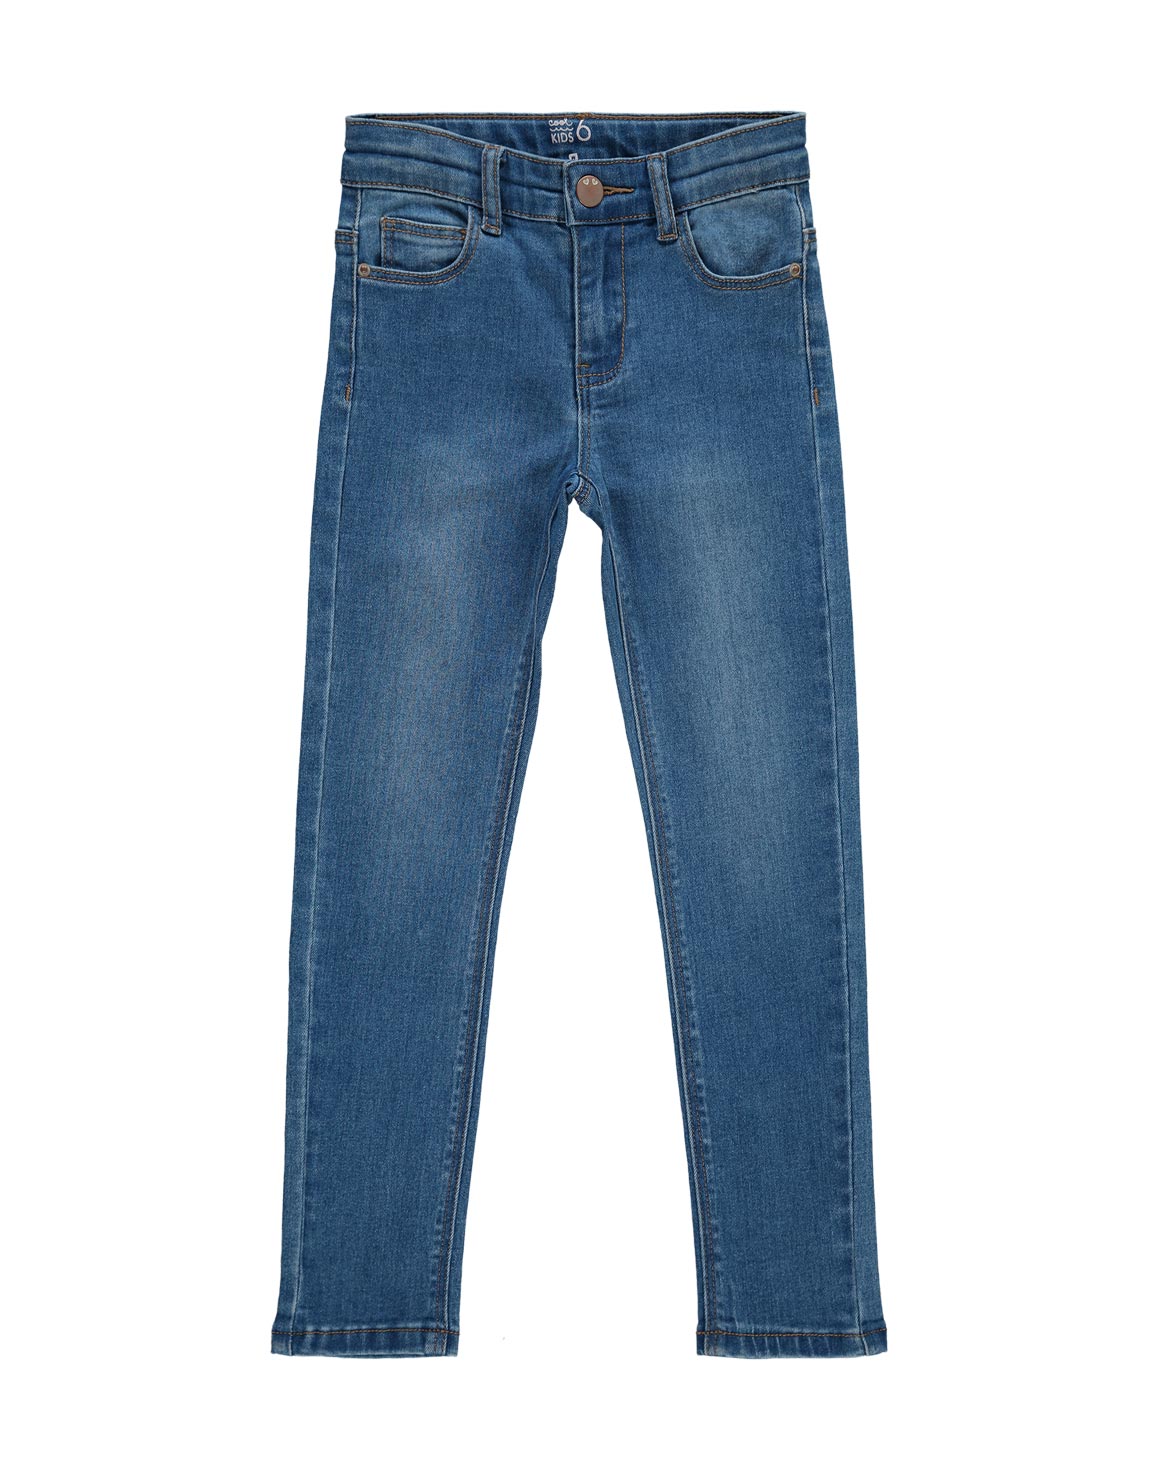 Adjustable Cotton Rich Skinny Jeans - Woolworths Mauritius Online